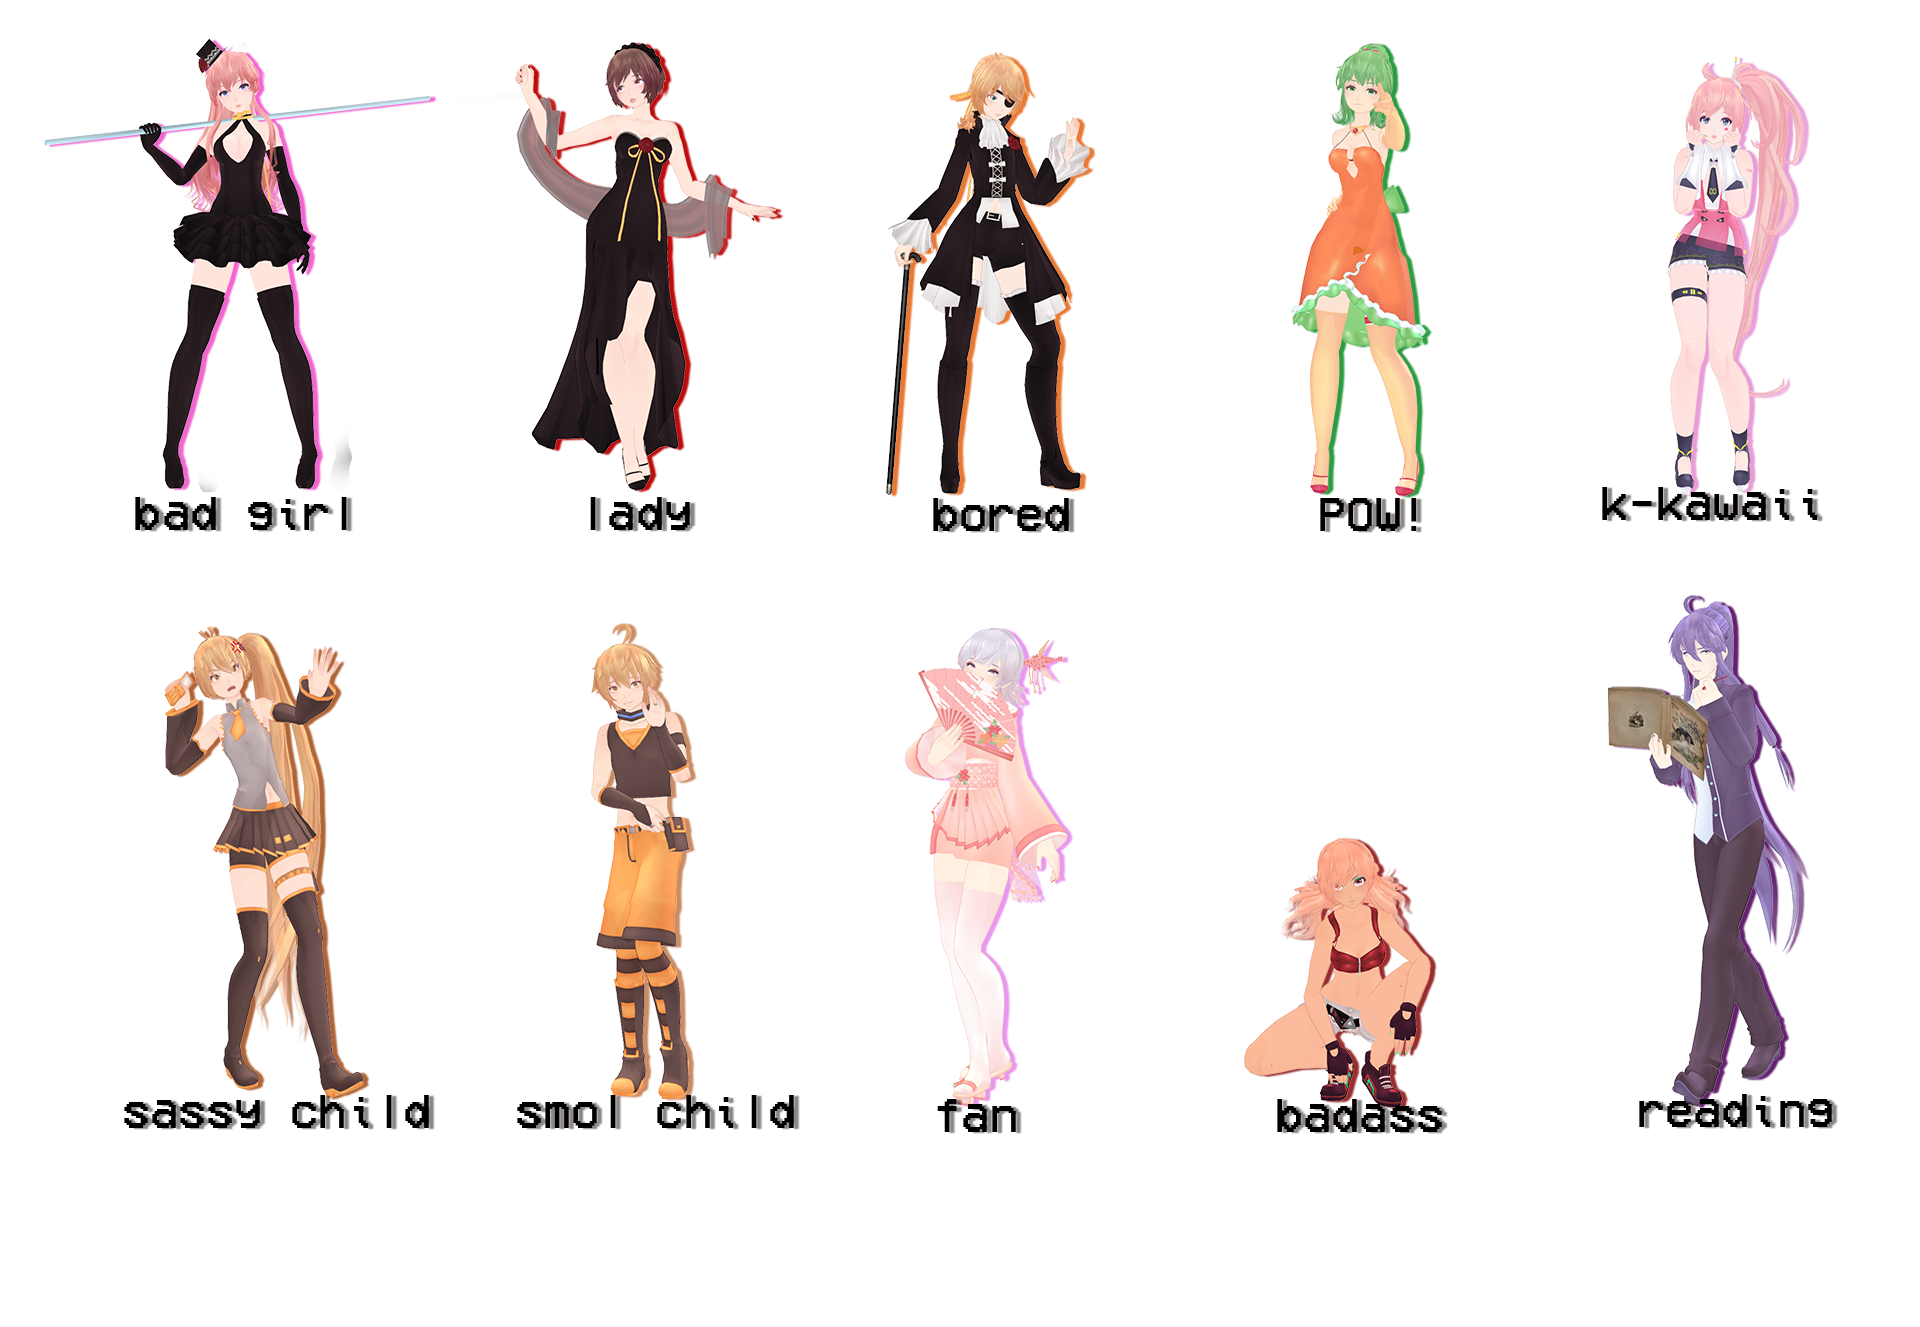 MMD] Pose Pack 1 - DL by shiryohere on DeviantArt